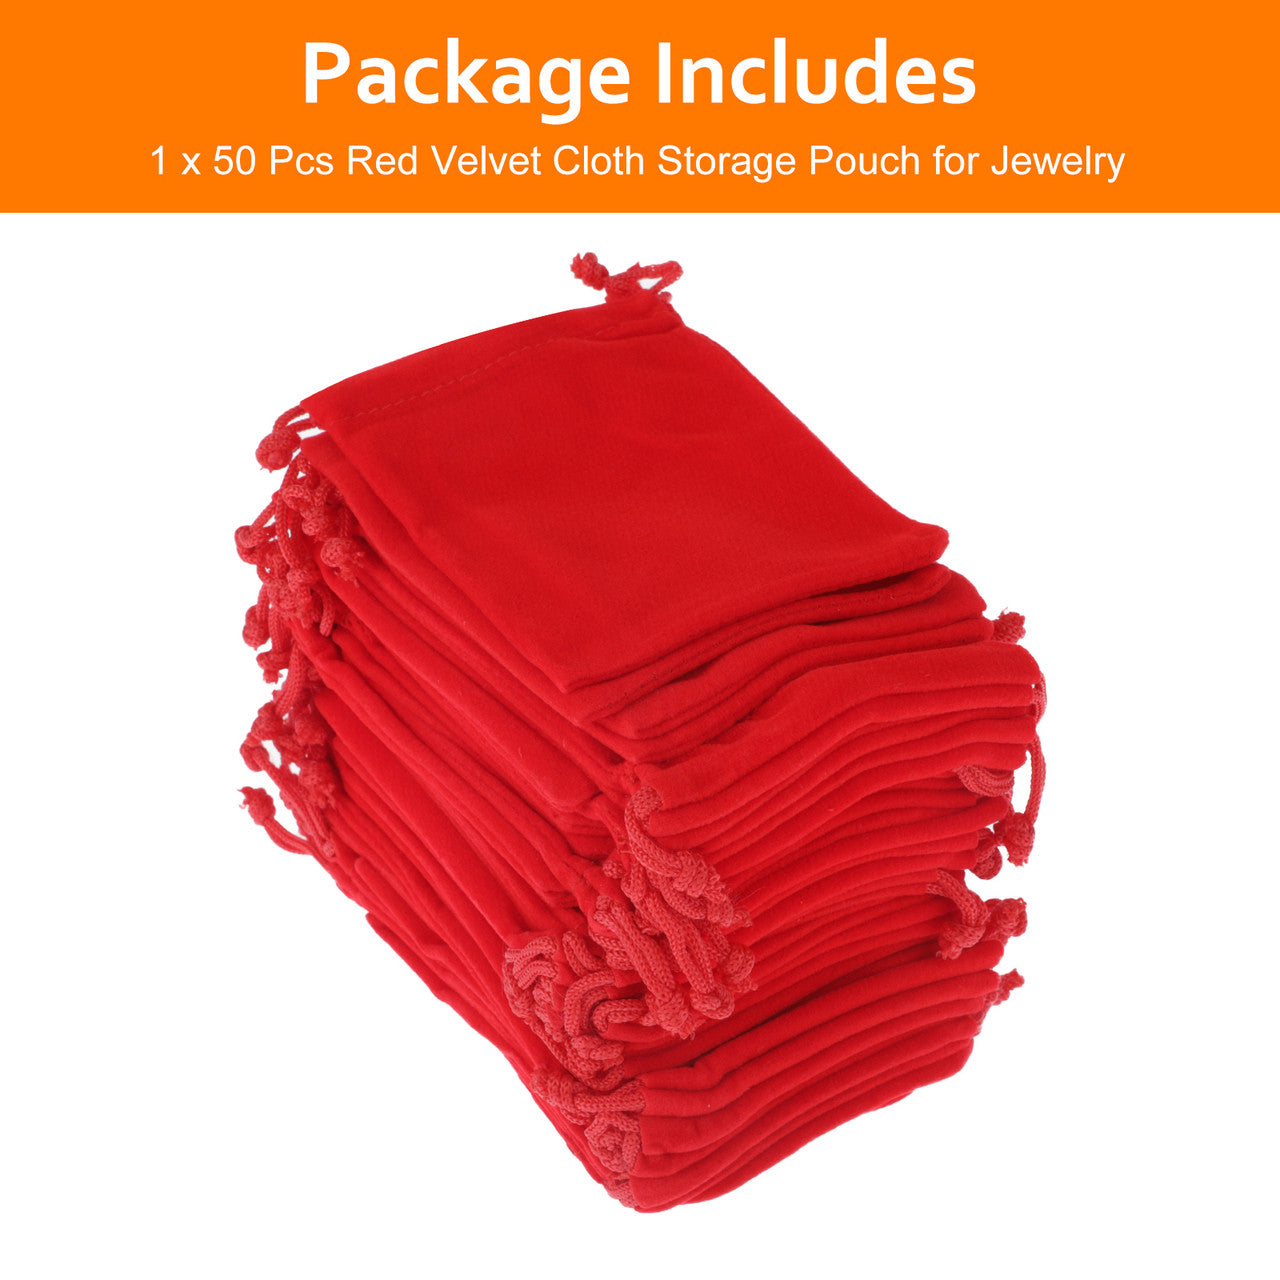 50 Pcs Cuffed Flannel Bag -  2.76 x 3.54 IN Jewelry Pouches Drawstring Bags Candy Gift Bag Pouch Christmas Wedding Favors (Red)